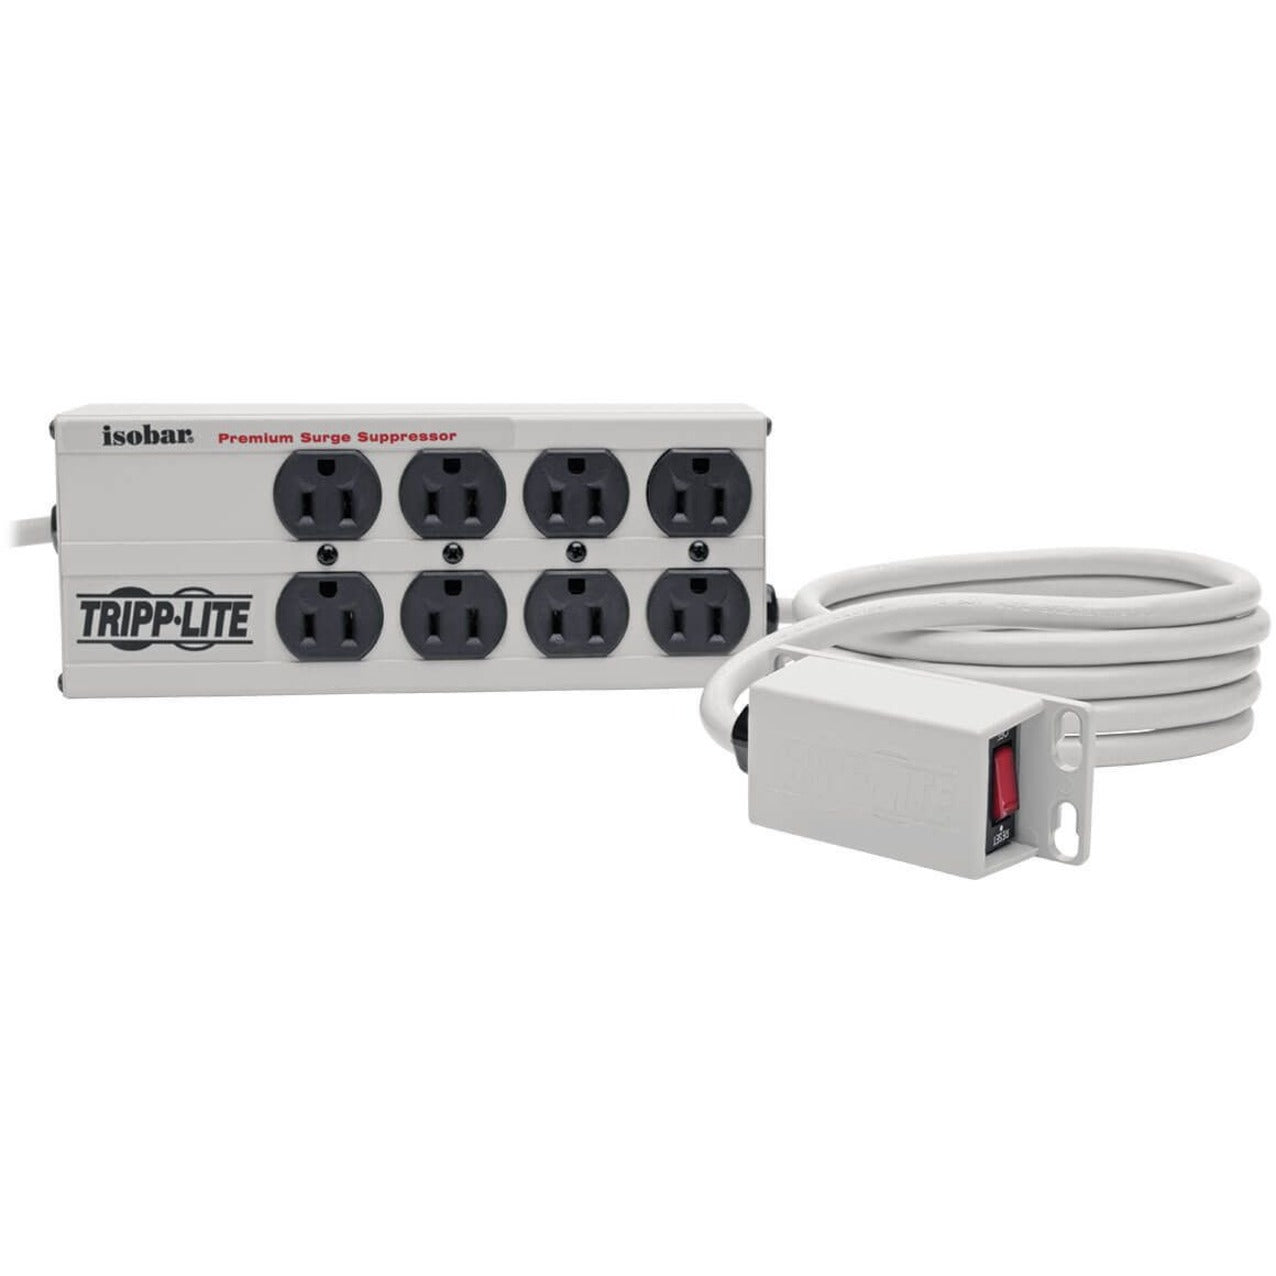 Tripp Lite Isobar 8-Outlet Surge Protector 12 ft. Cord with Right-Angle Plug 3840 Joules Remote Master Switch Metal Housing